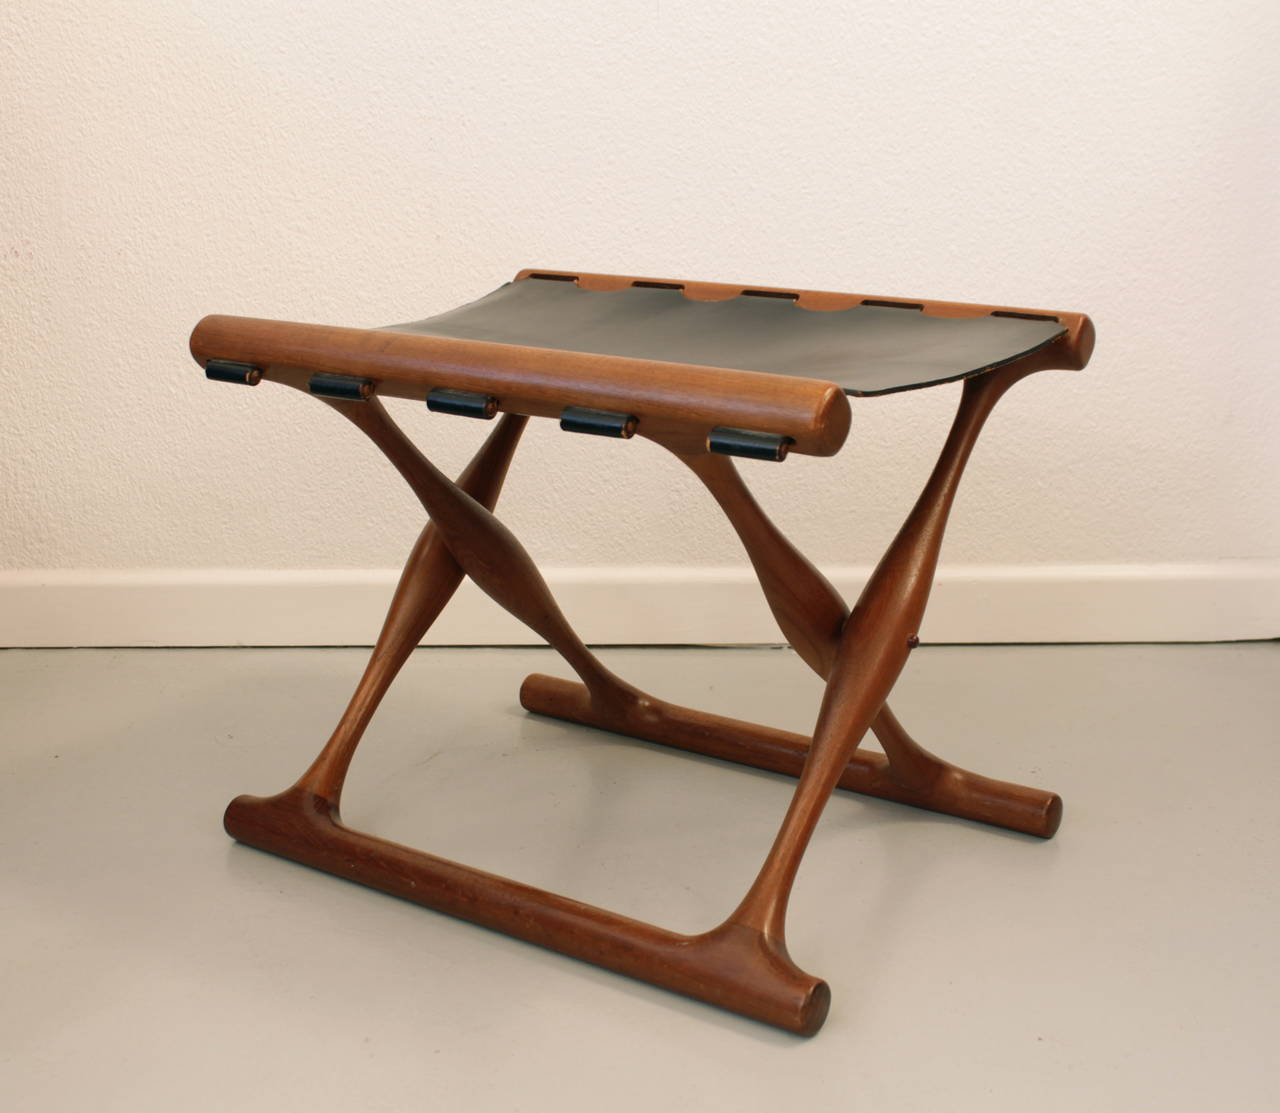 Guldhoj teak and leather folding stool by Poul Hundevad
Solid teak and black leather, very good condition
Original leather with labels
Denmark ca.1957